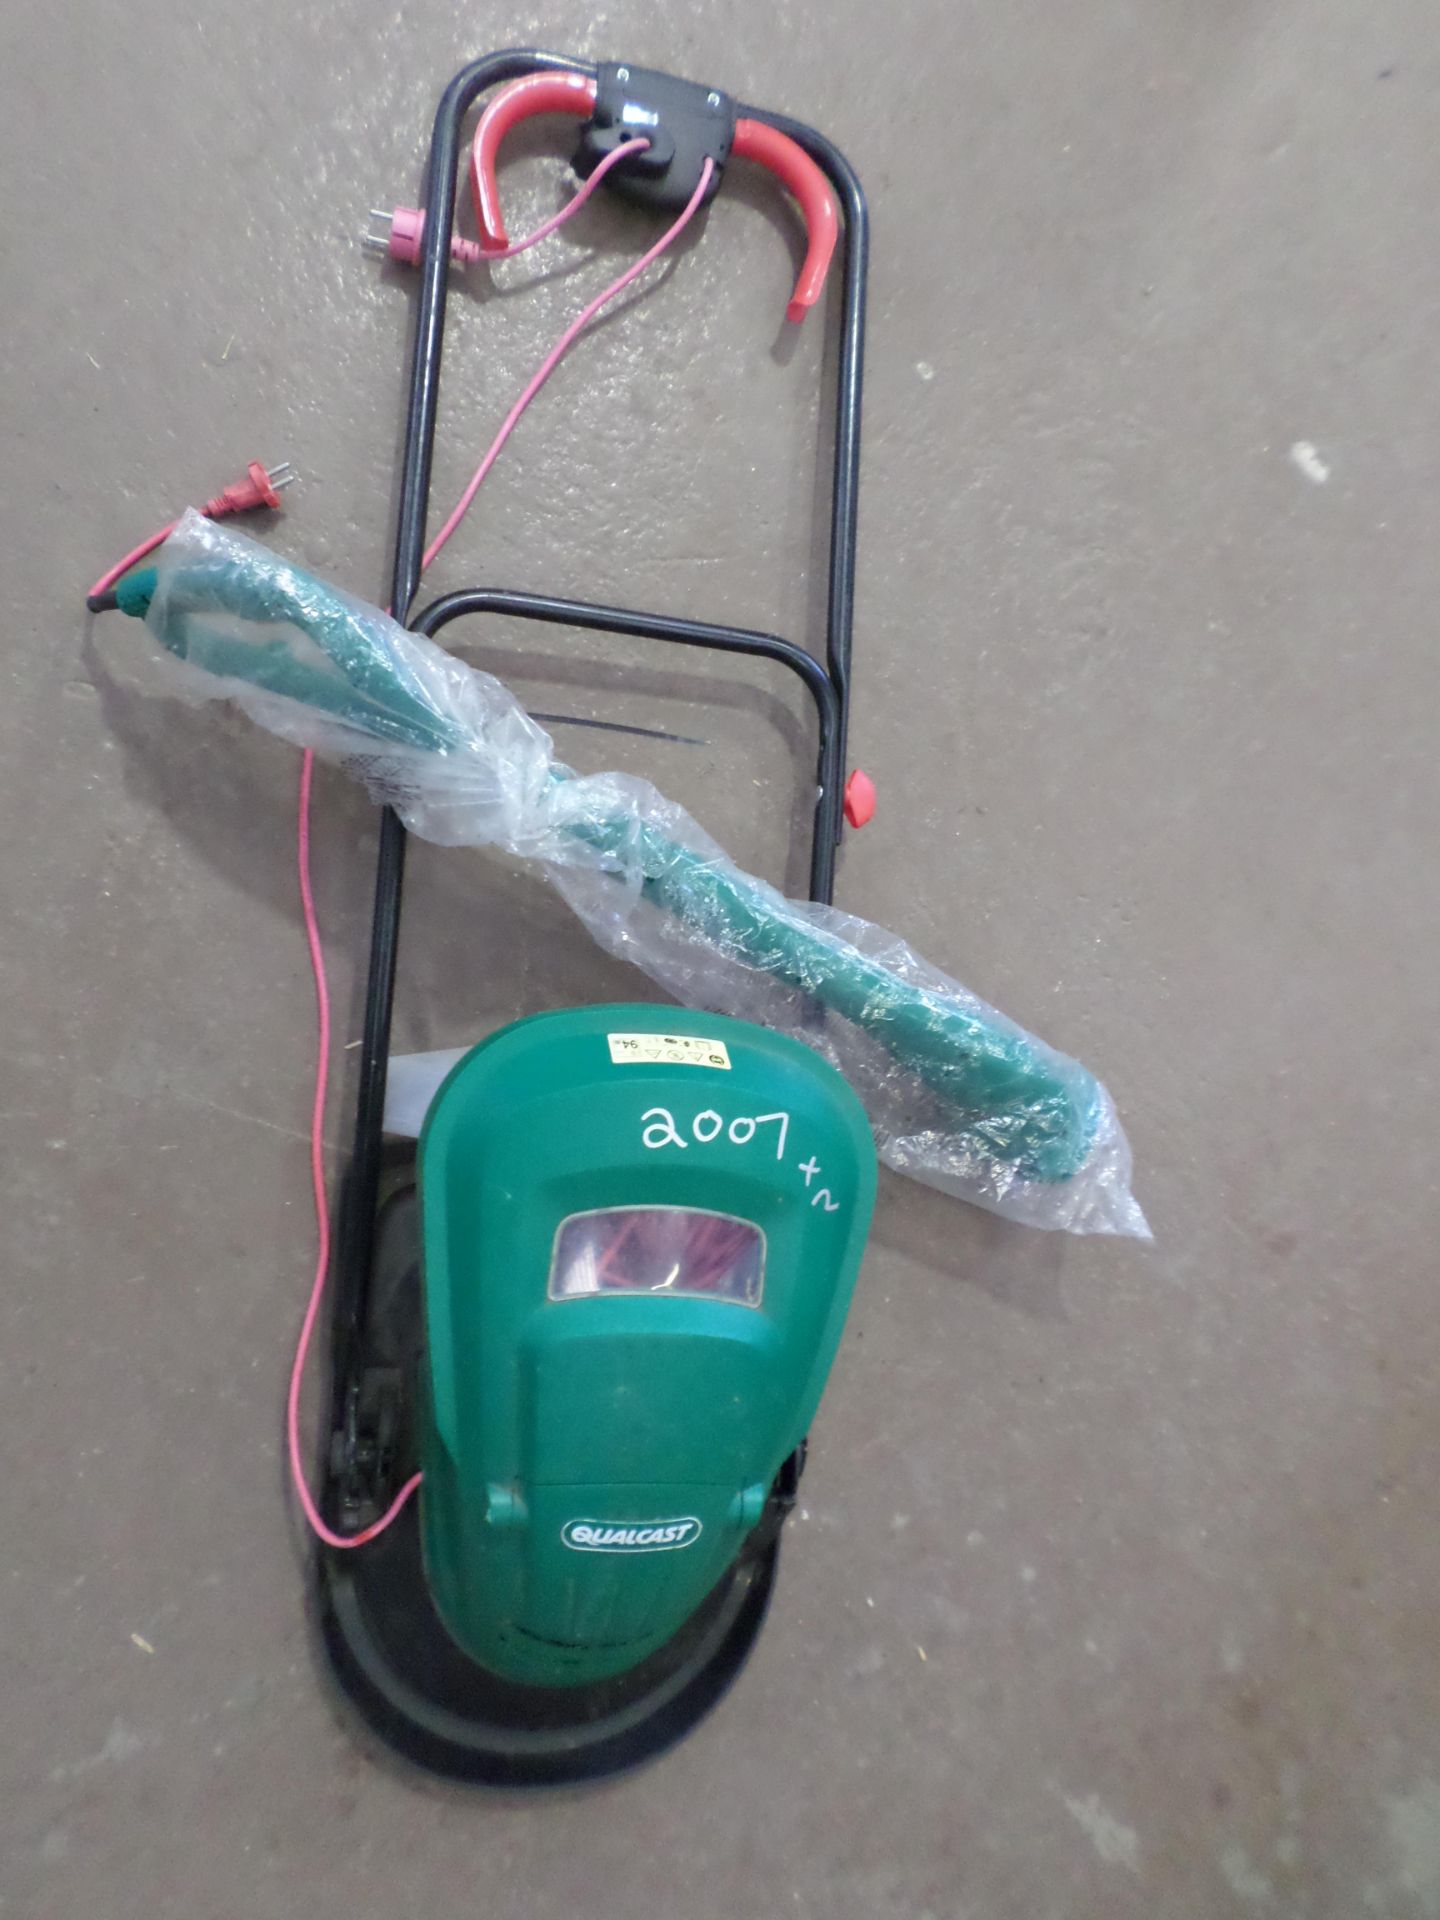 Electric lawnmower and Qualcast electric strimmer